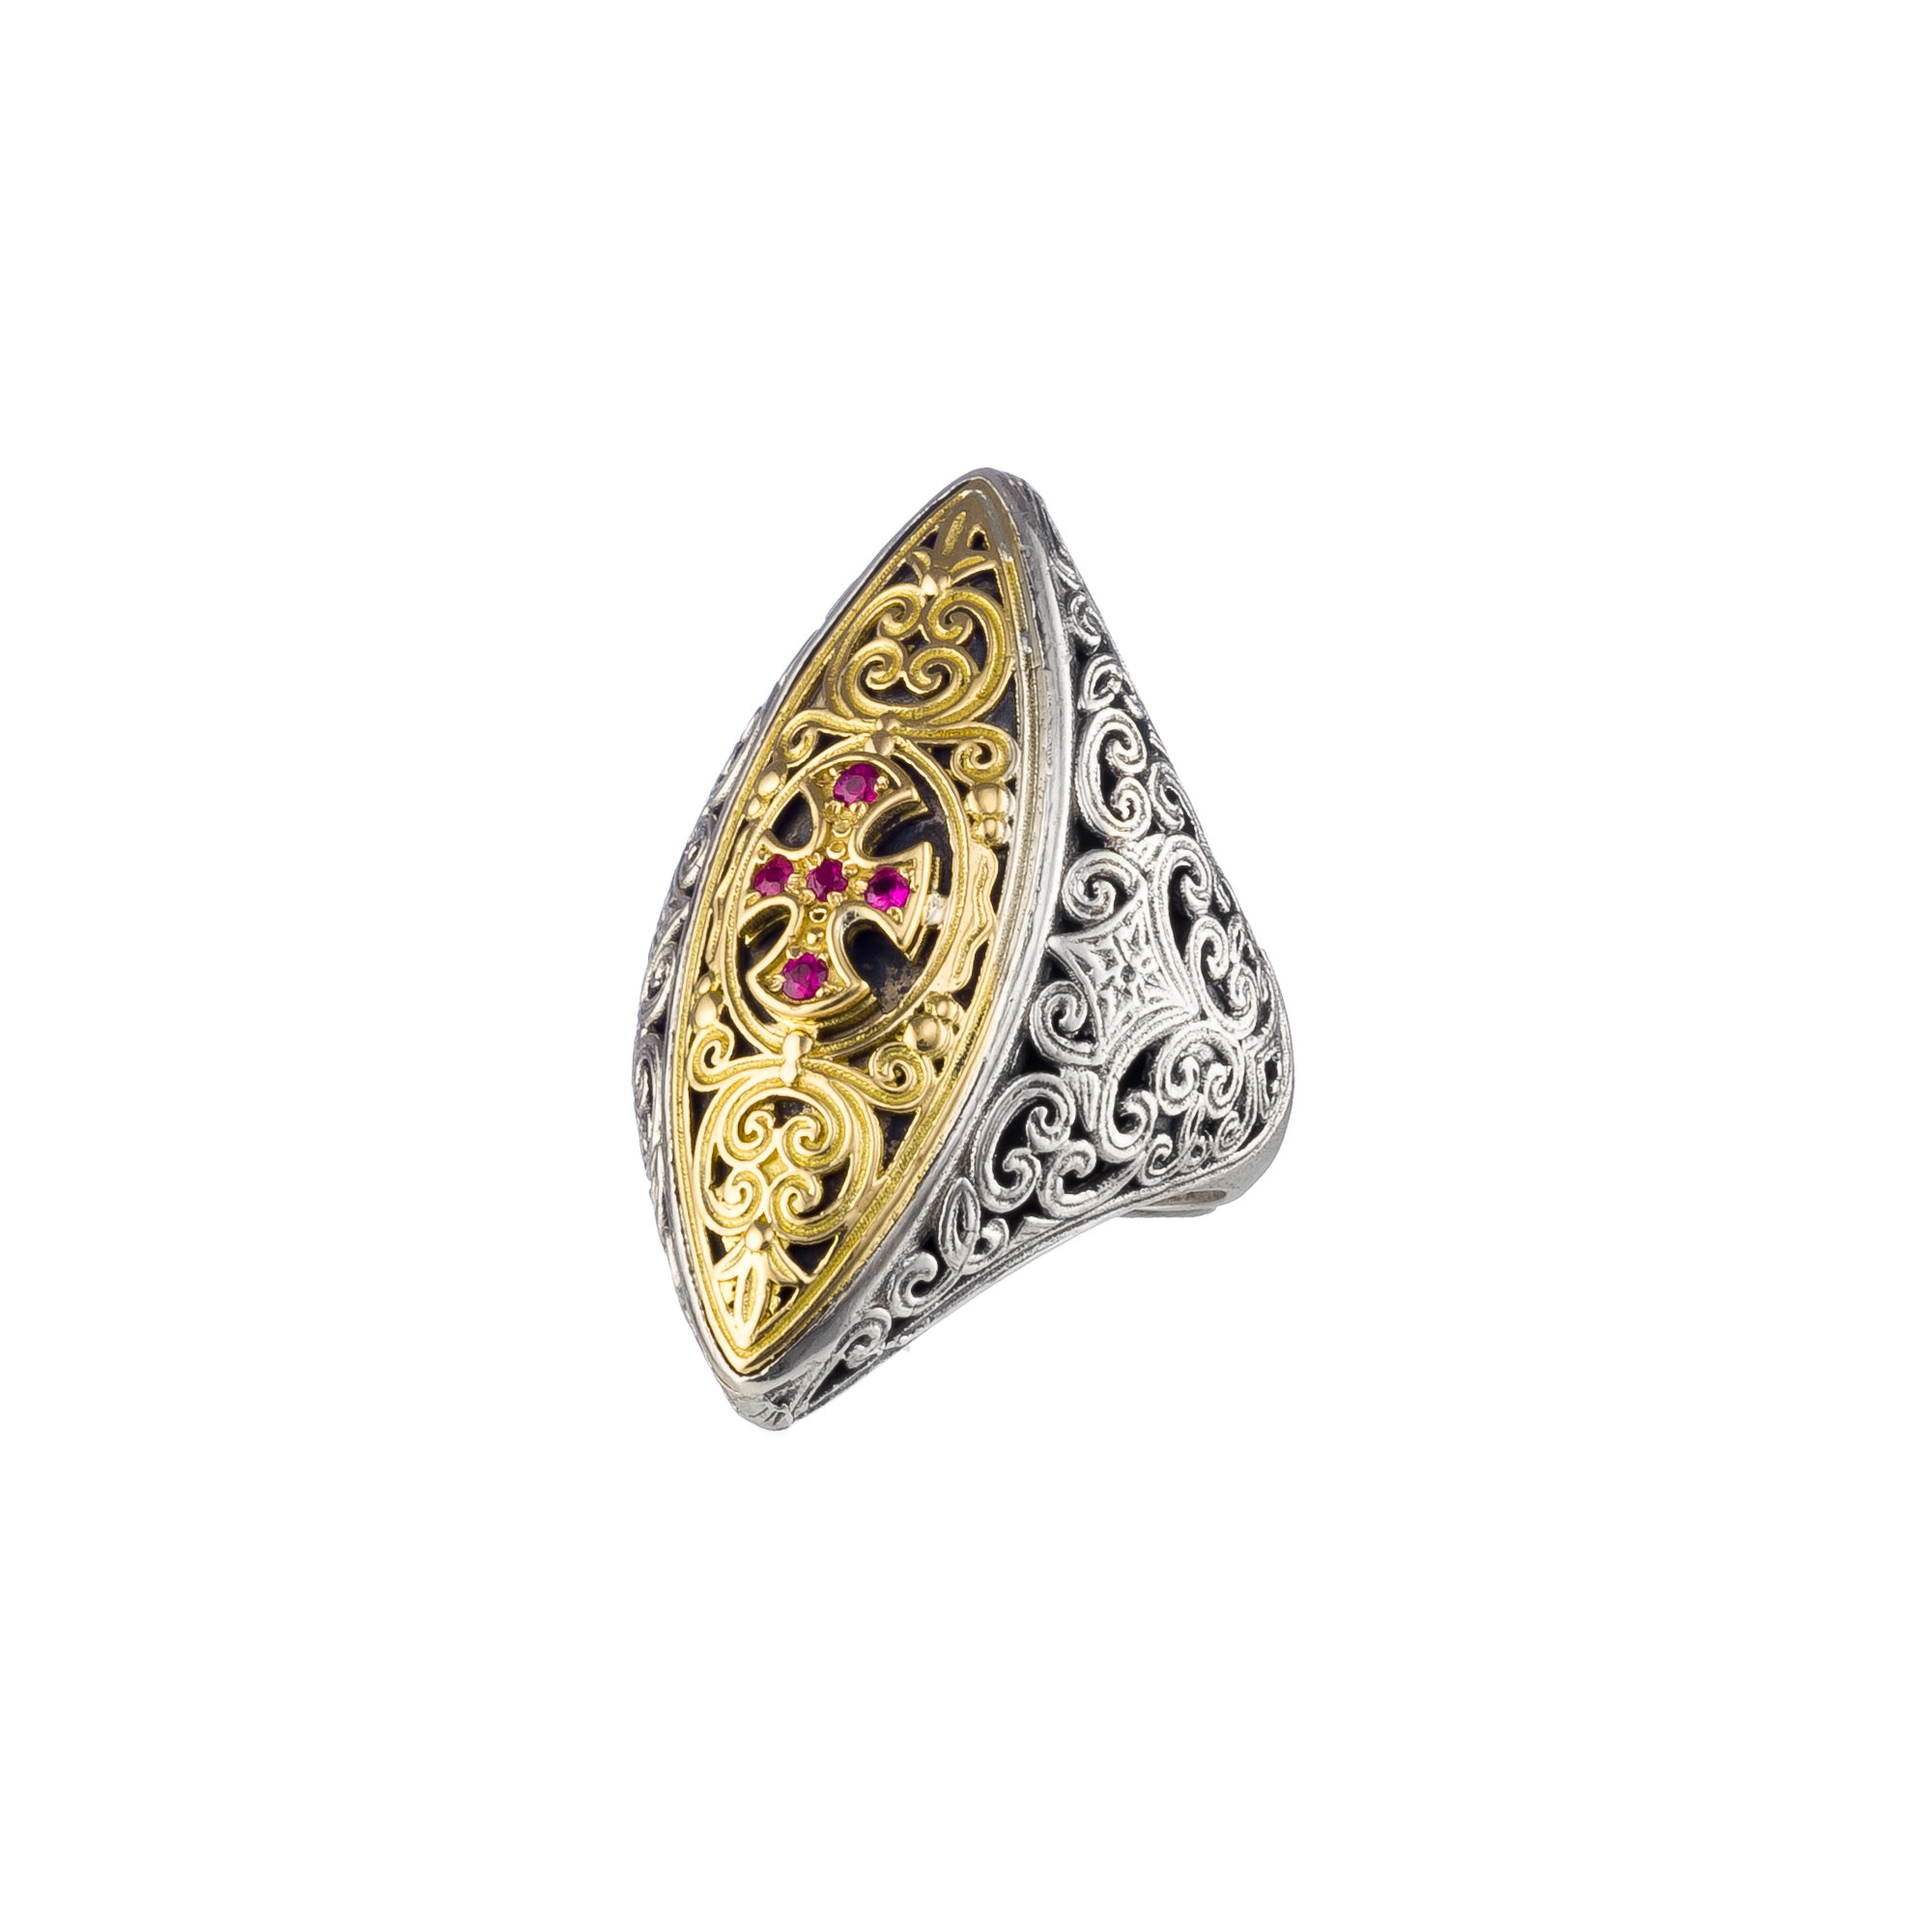 Faidra ring in 18K Gold and Sterling silver with precious stones